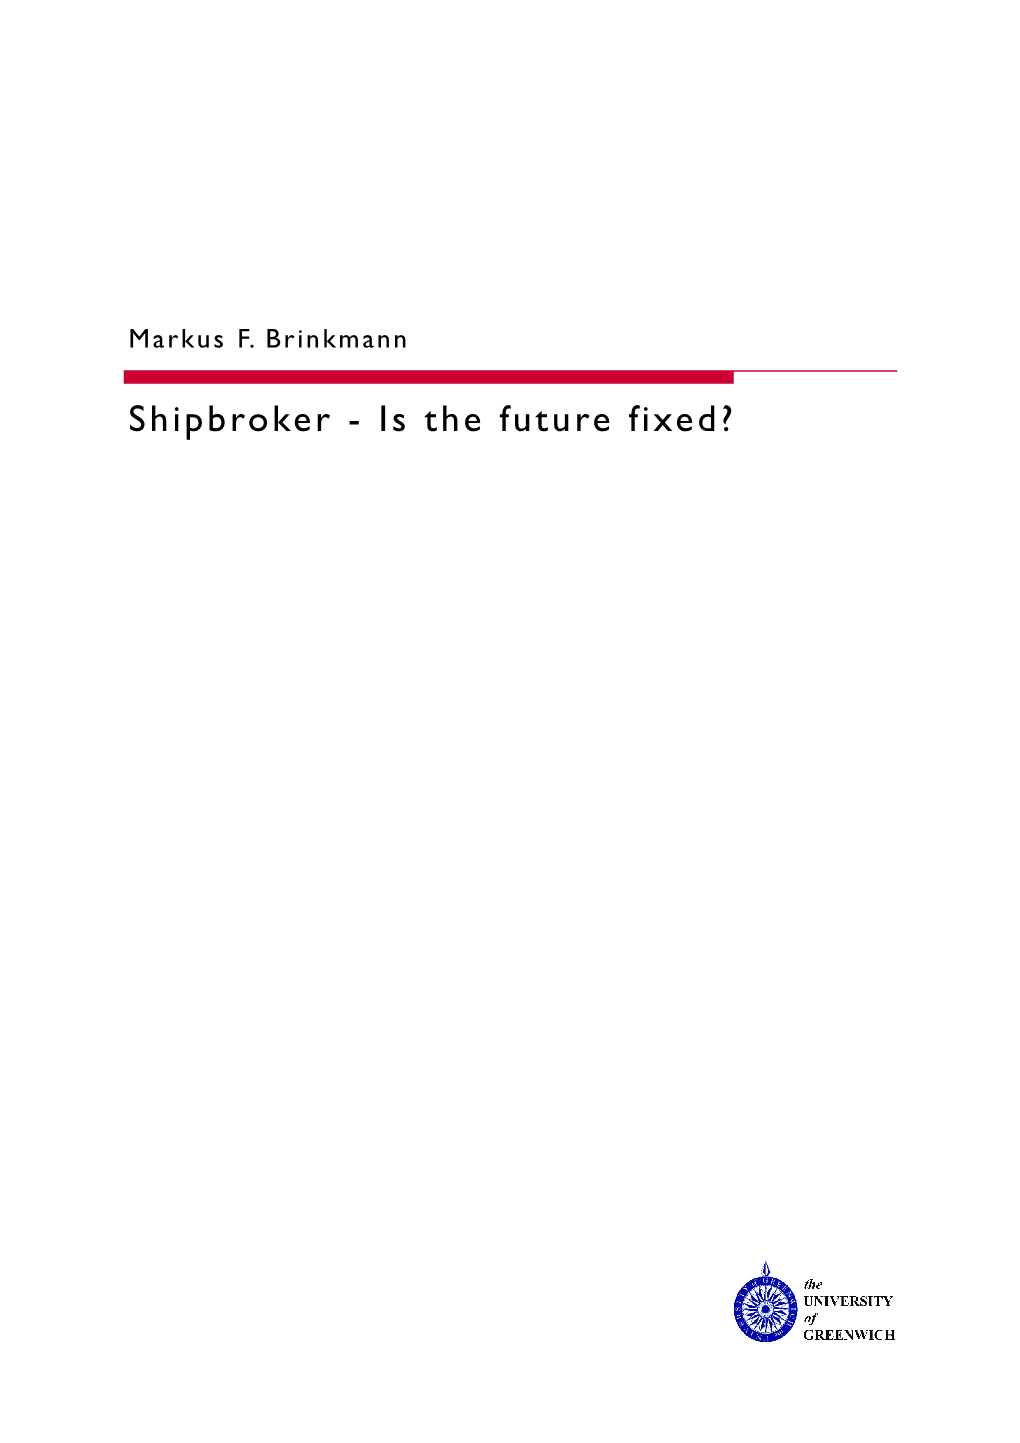 Shipbroker - Is the Future Fixed? First Published in Great Britain 2008 for the University of Greenwich